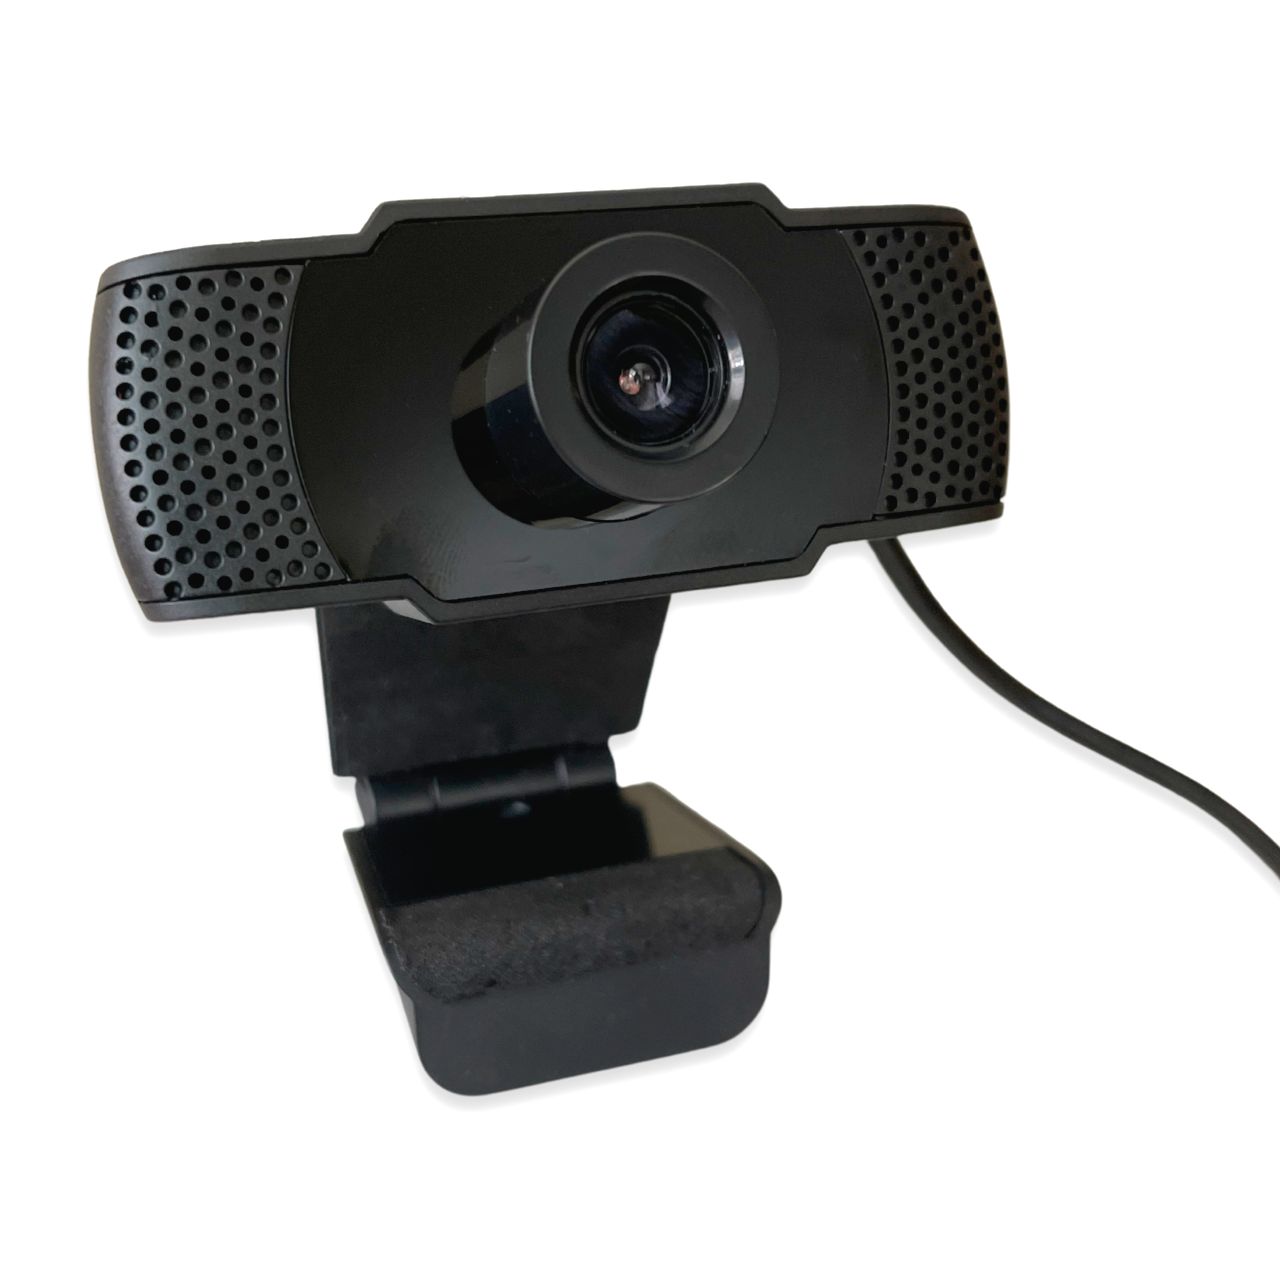 Hd Usb Webcam And Microphone 1080p